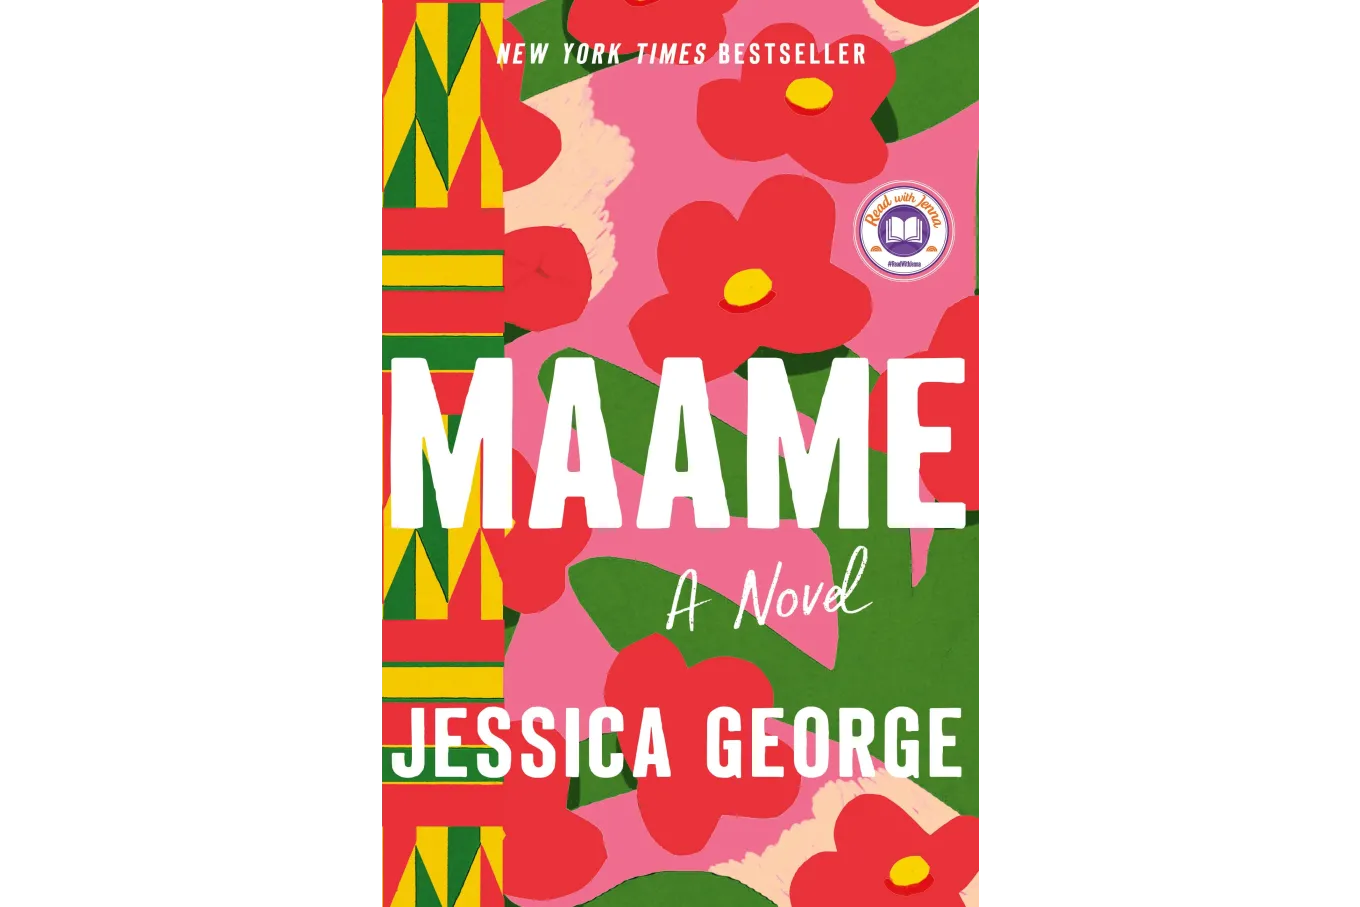 Cover of Maame